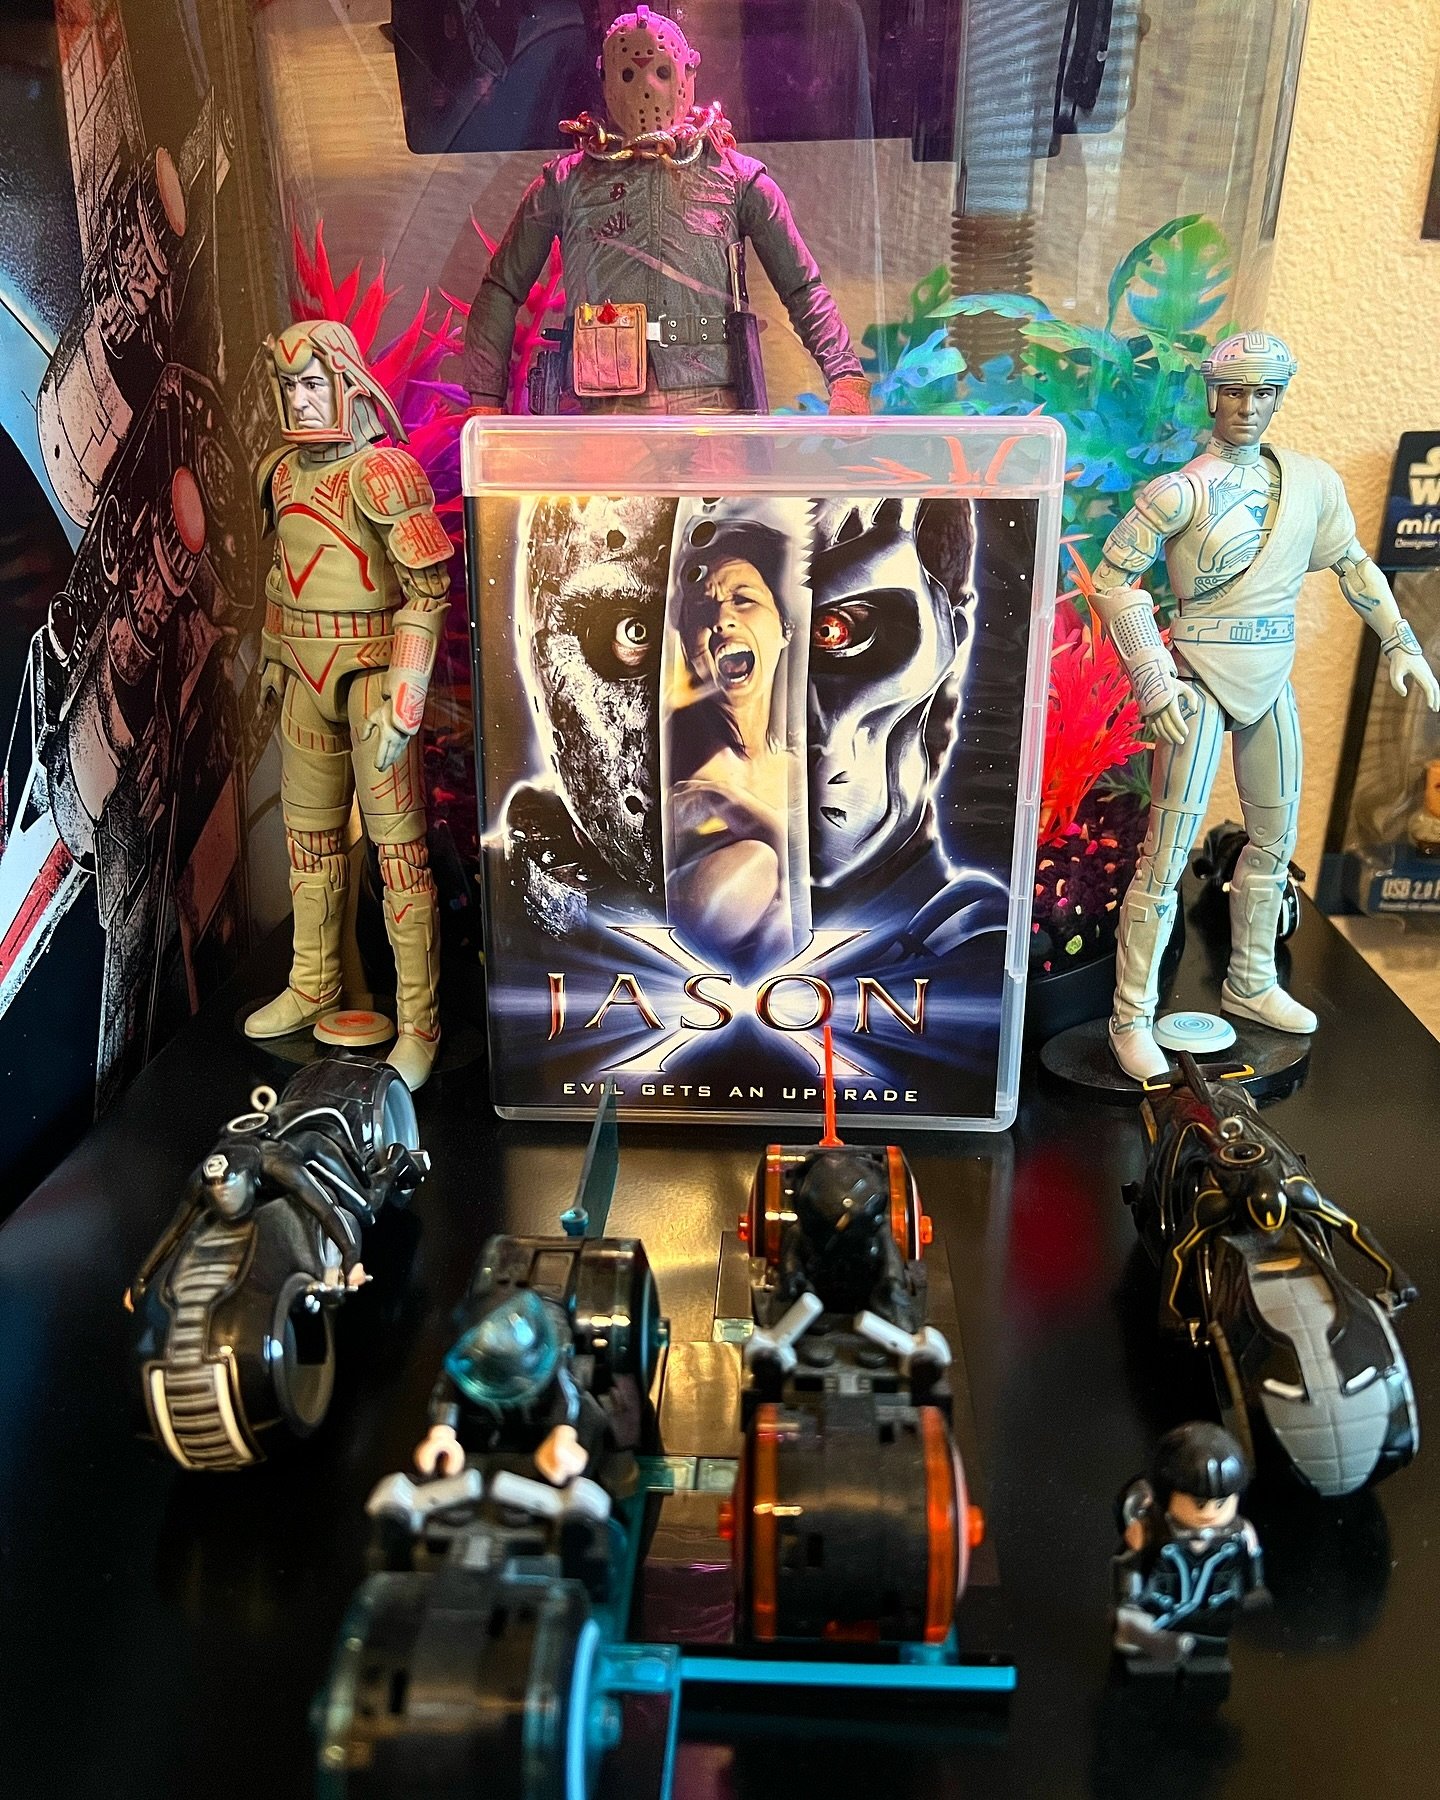 Happy 23rd anniversary to JASON X! It came out in the US on this day in 2001. Where does this entry rank for you in the FRIDAY THE 13th franchise?
&mdash;&mdash;&mdash;&mdash;&mdash;&mdash;&mdash;&mdash;&mdash;&mdash;&mdash;&mdash; 
#PodcastingAfterD